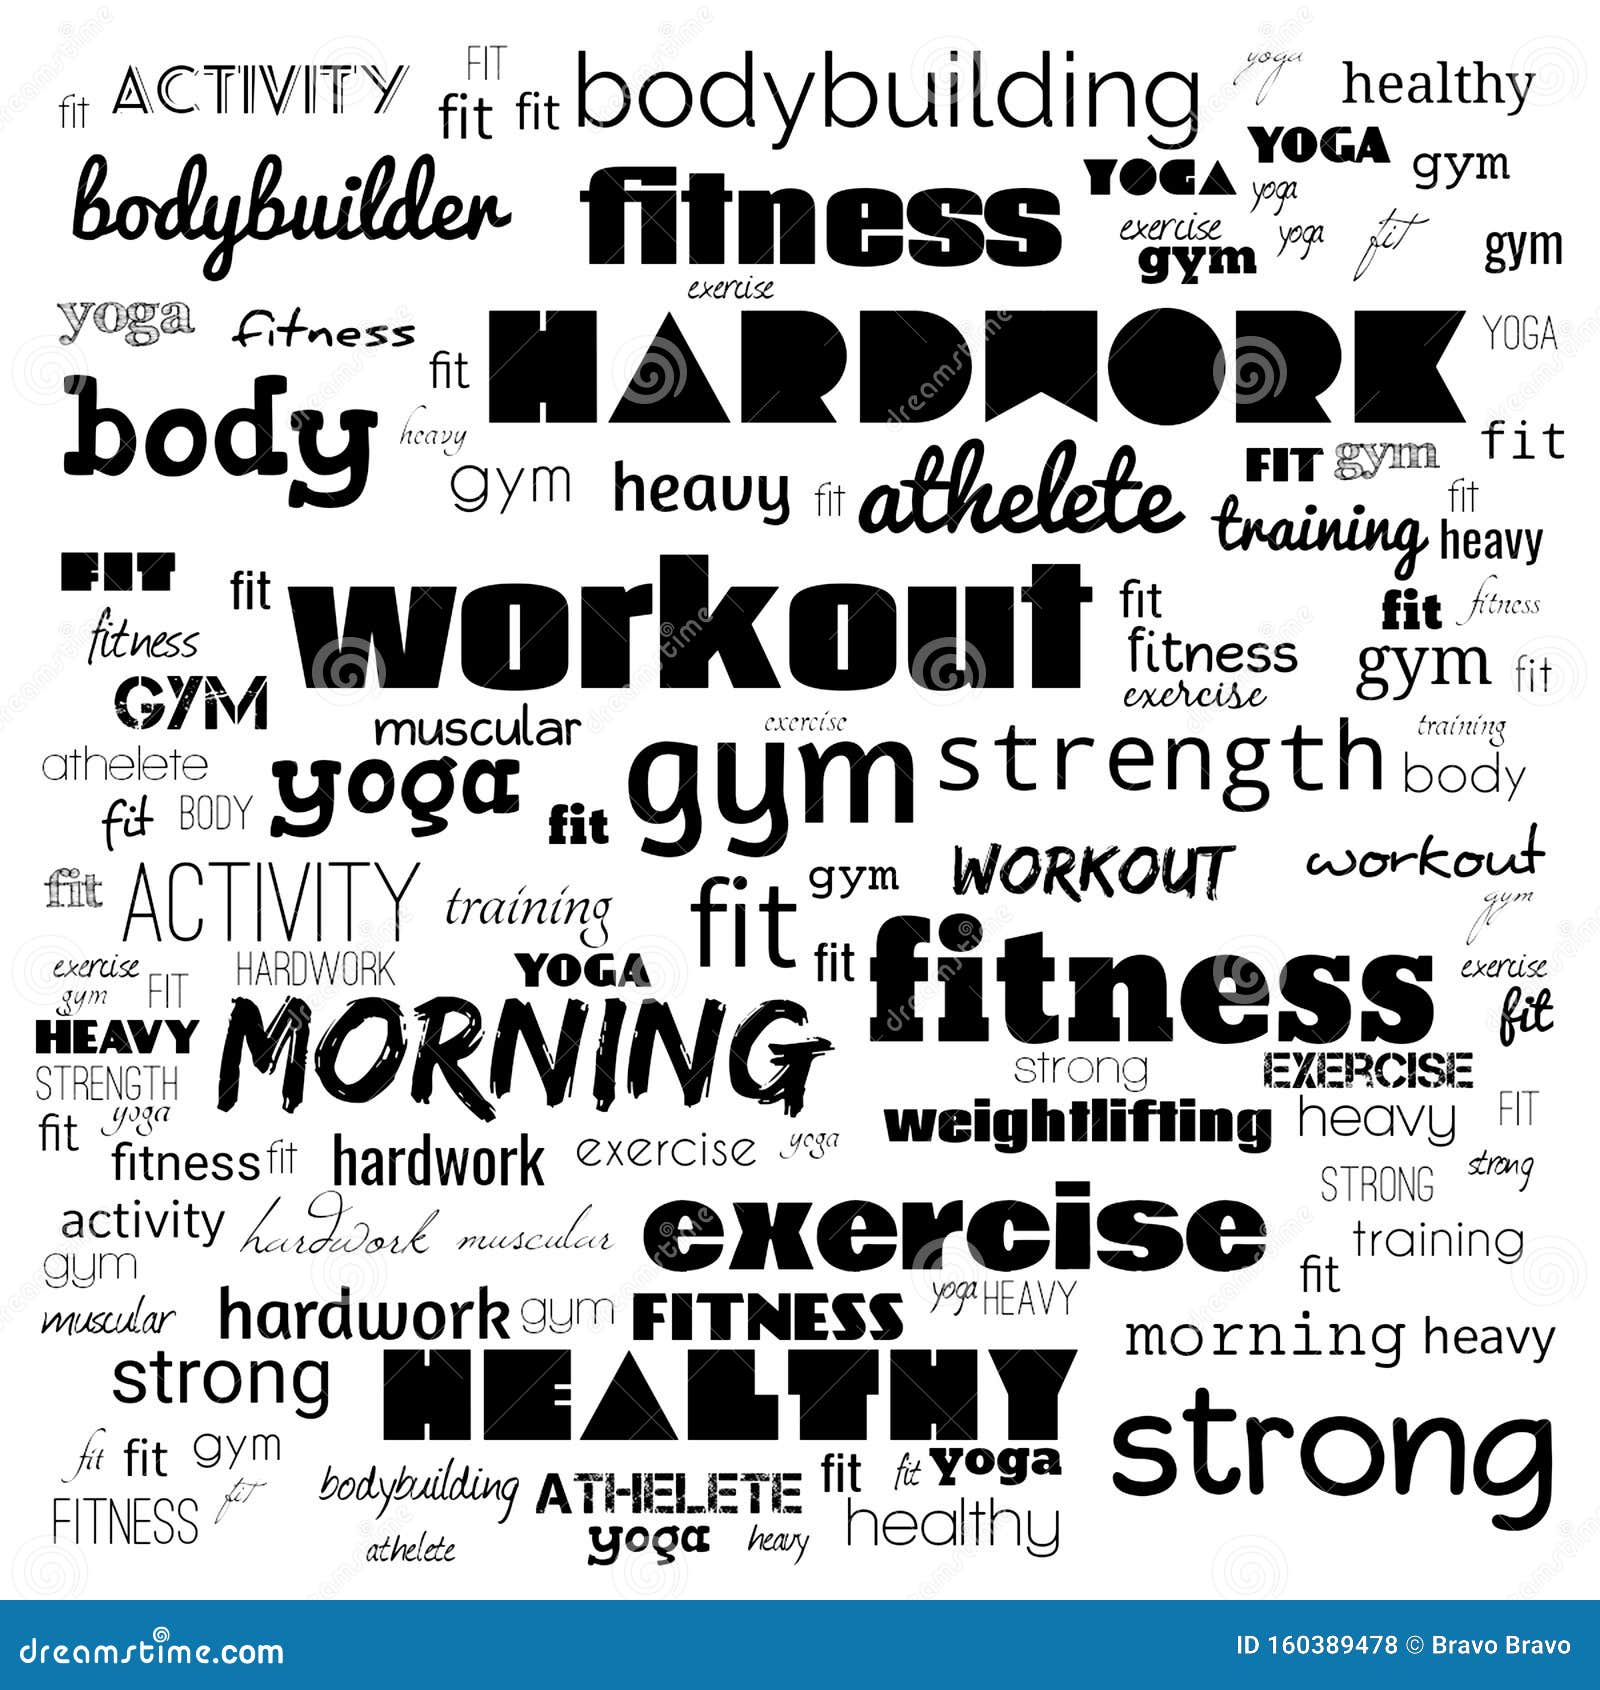 Fitness Sport Gym Lifestyle Health Concept Word And Icon Cloud T Shirt Design Creative Poster Design Motivation Illustration Stock Illustration Illustration Of Concept Health 160389478,Graphic Designer Jobs In Fresno Ca